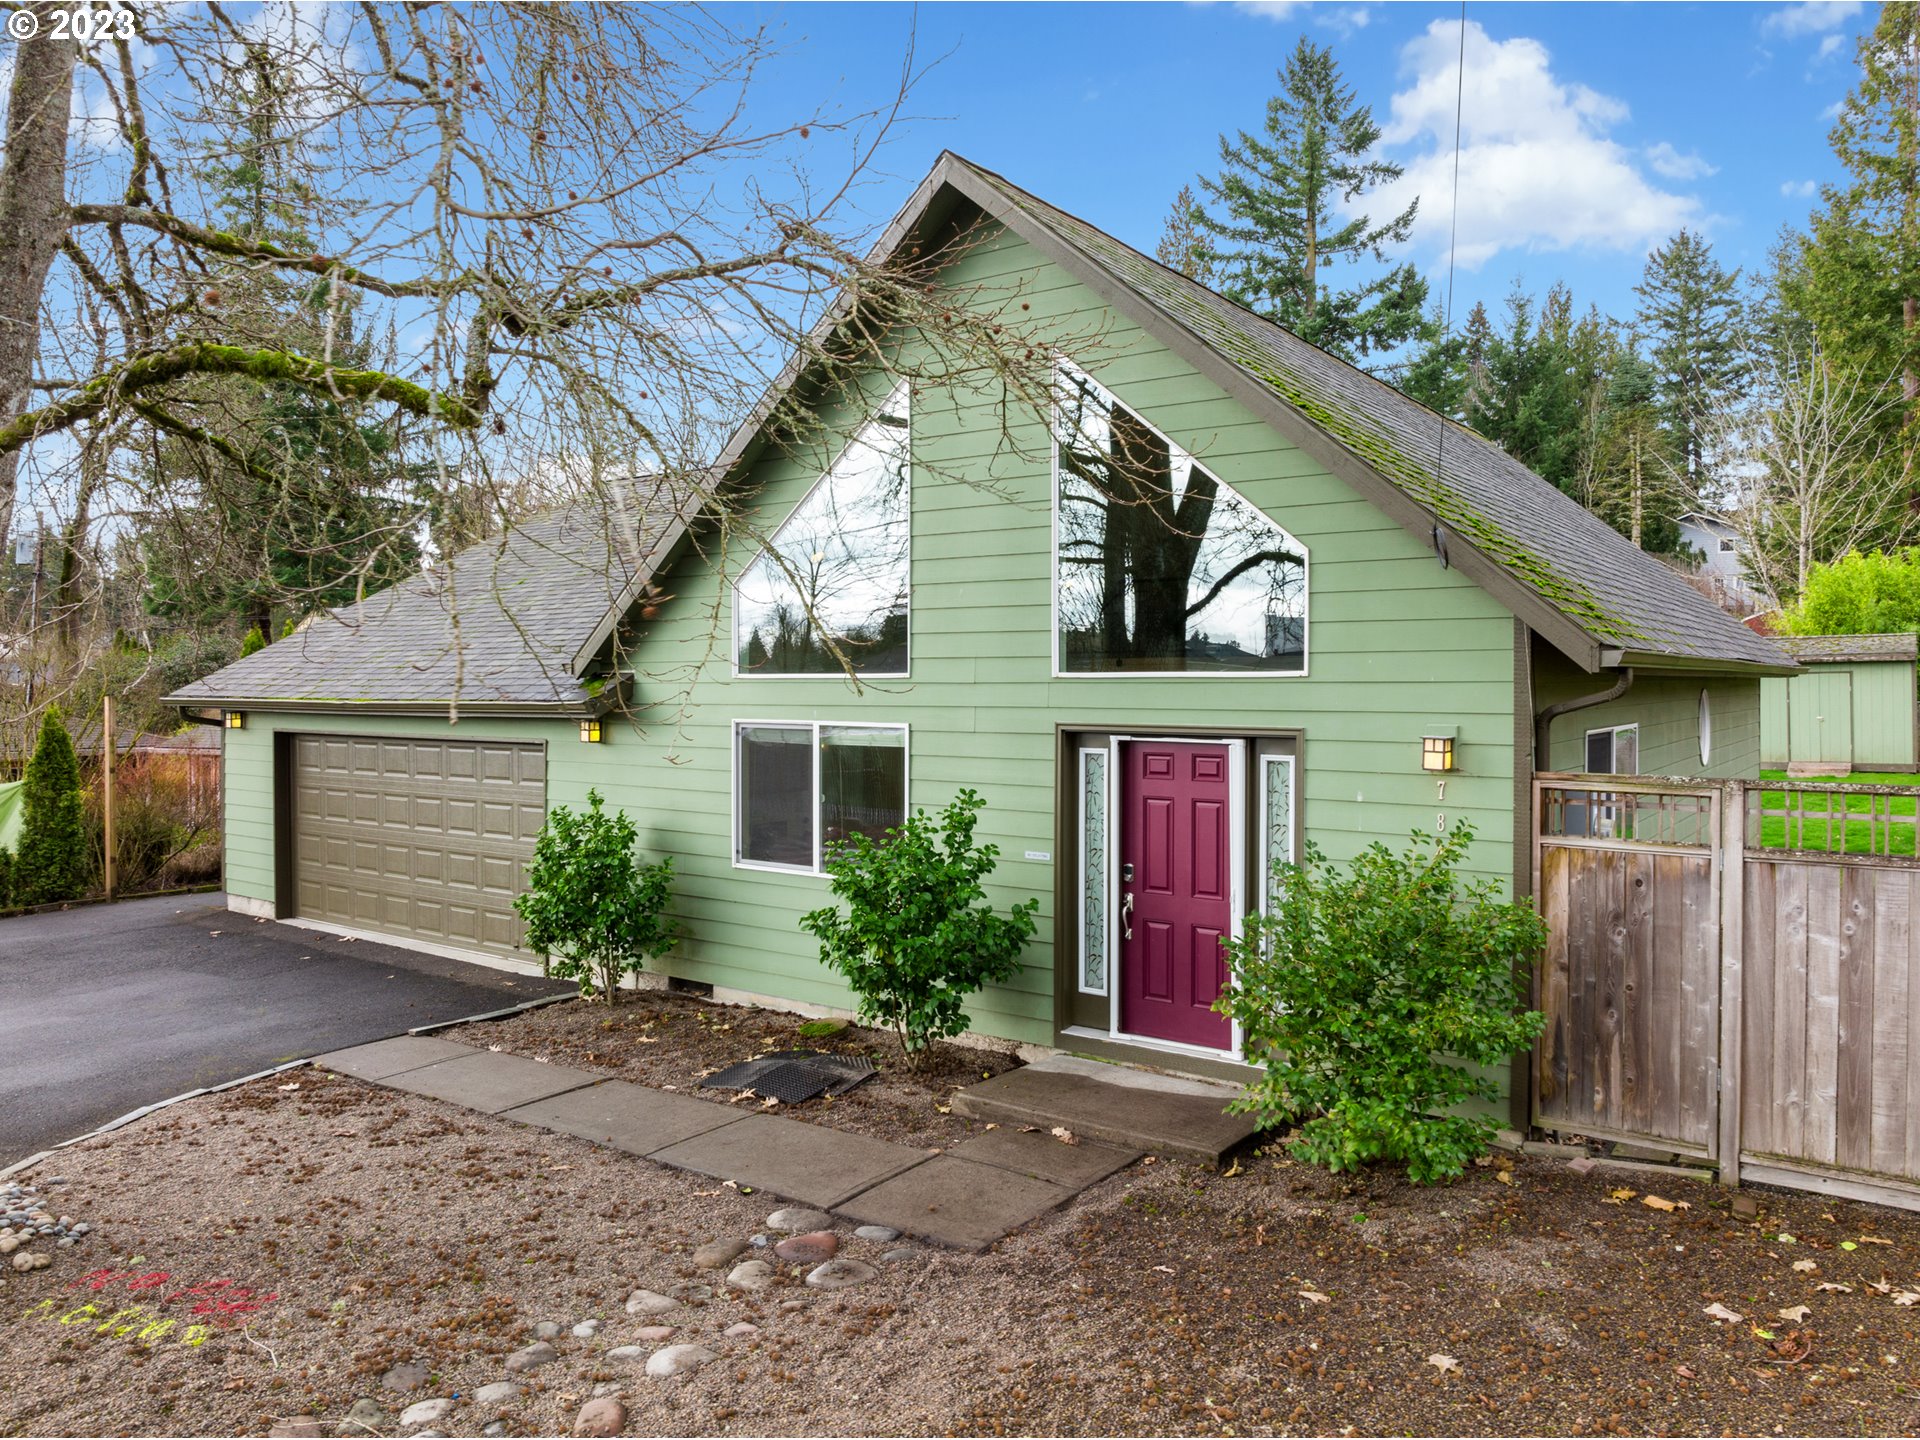 7845 SW 25TH AVE, Portland, OR 97219